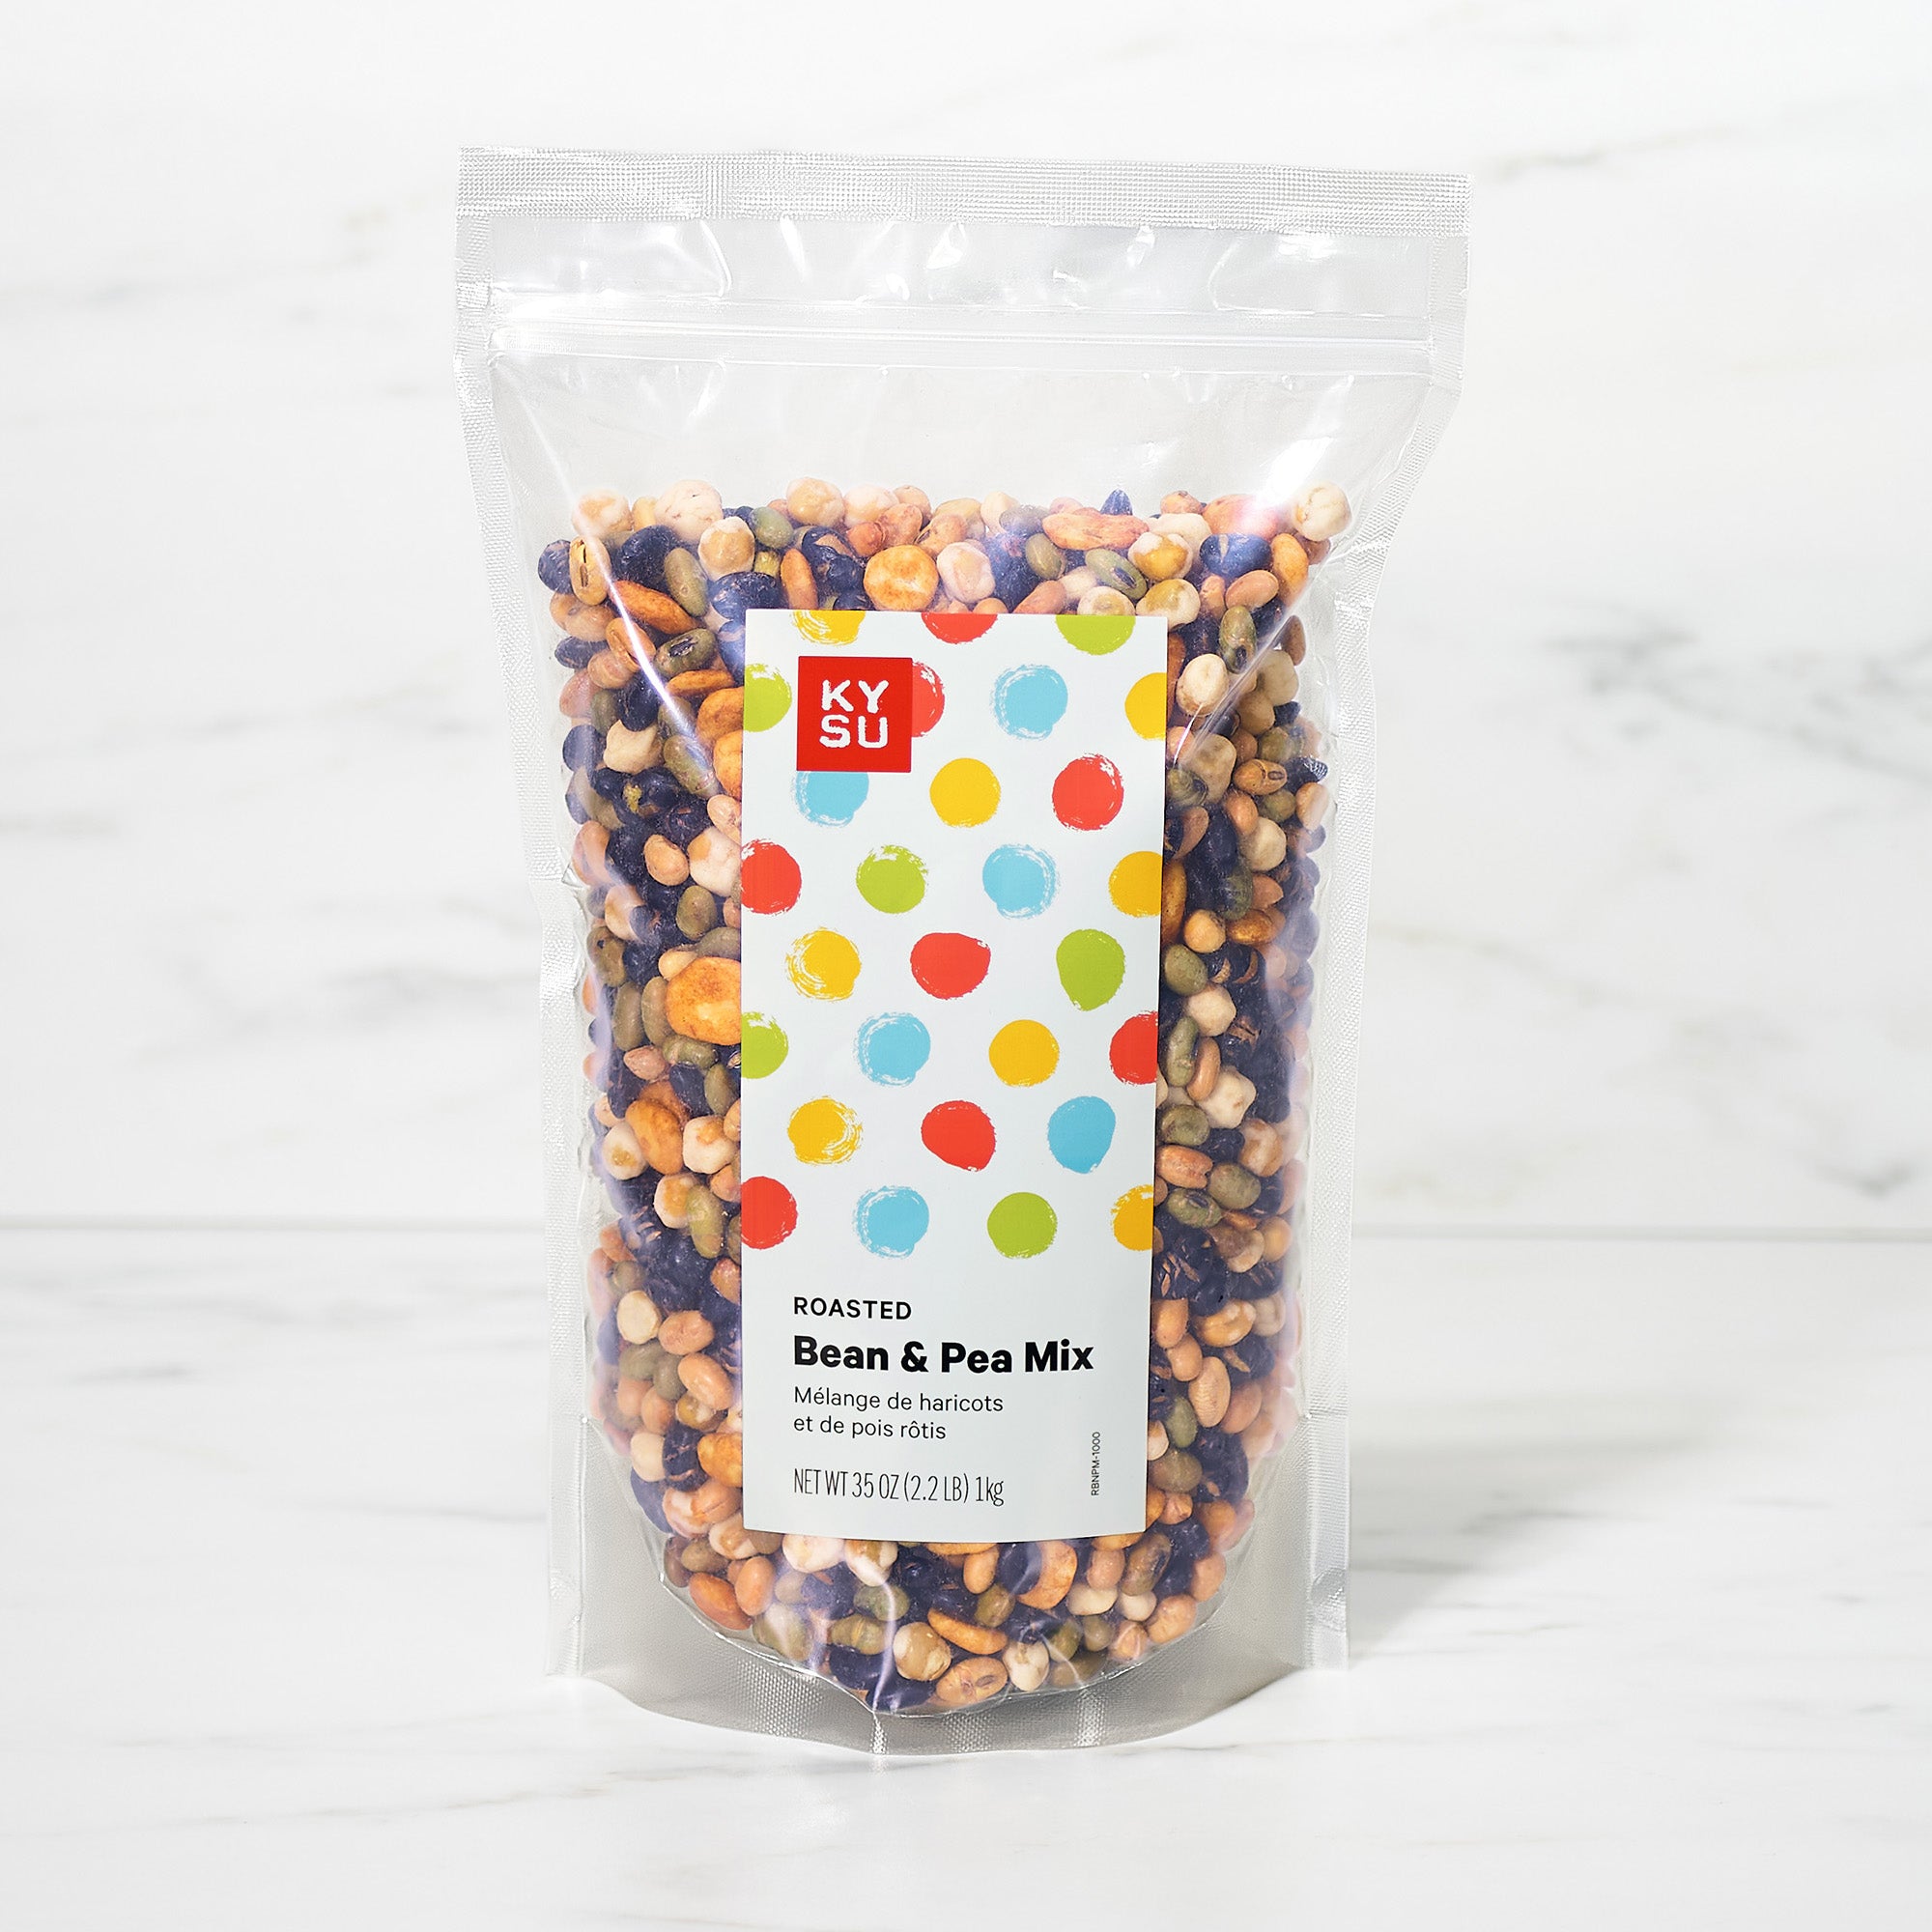 Roasted bean and pea mix with salt, 2.2 lb